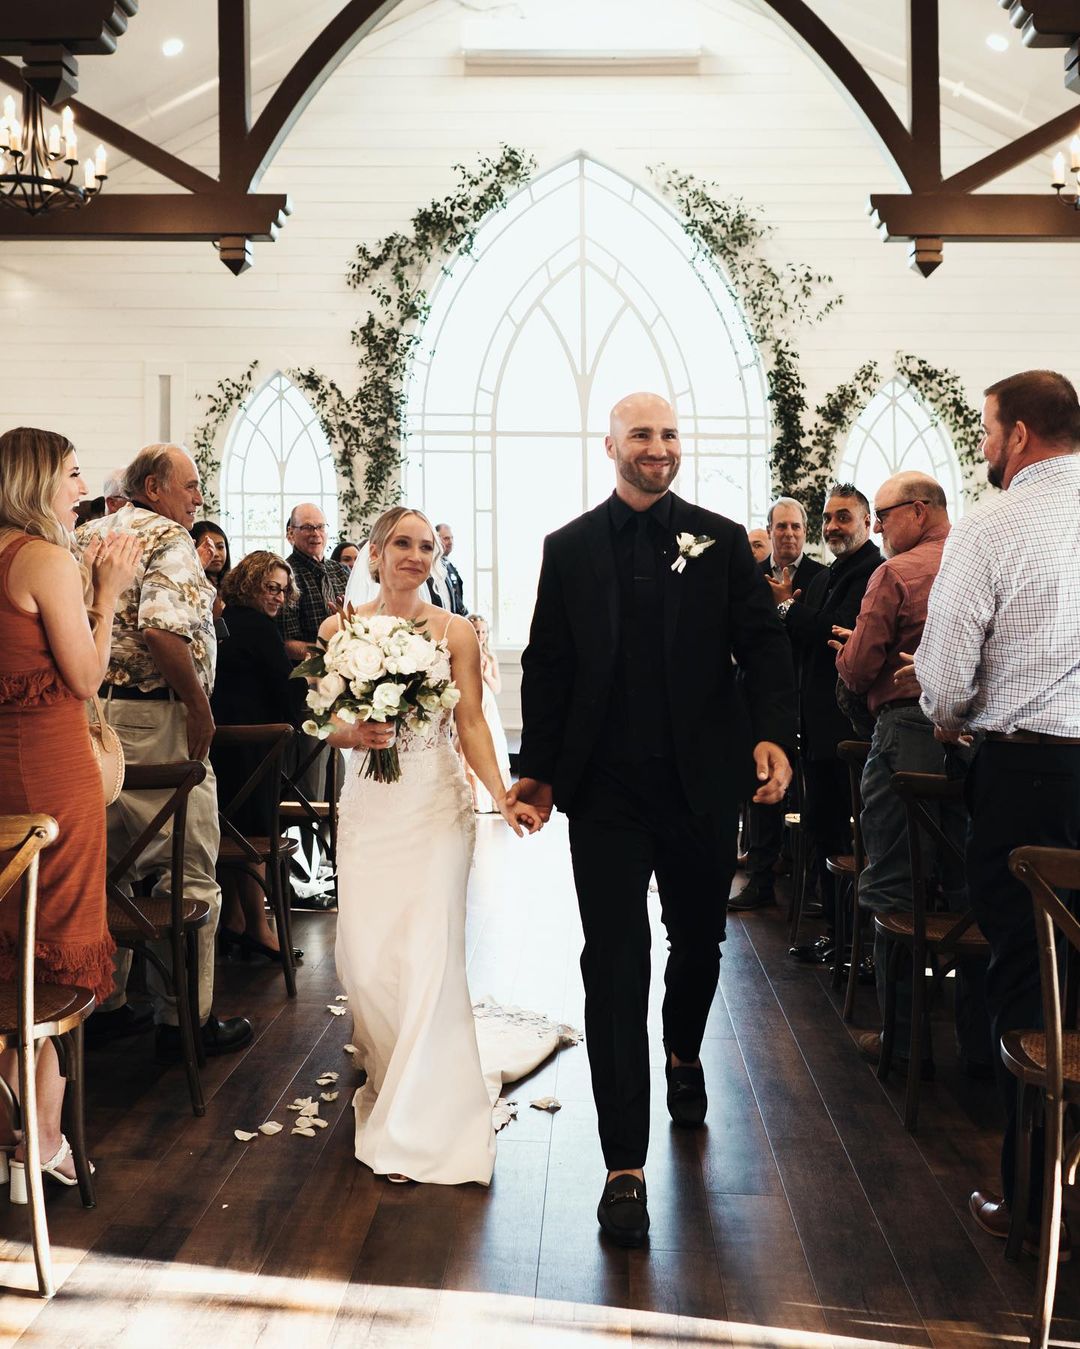 wedding in church prices for stunning day